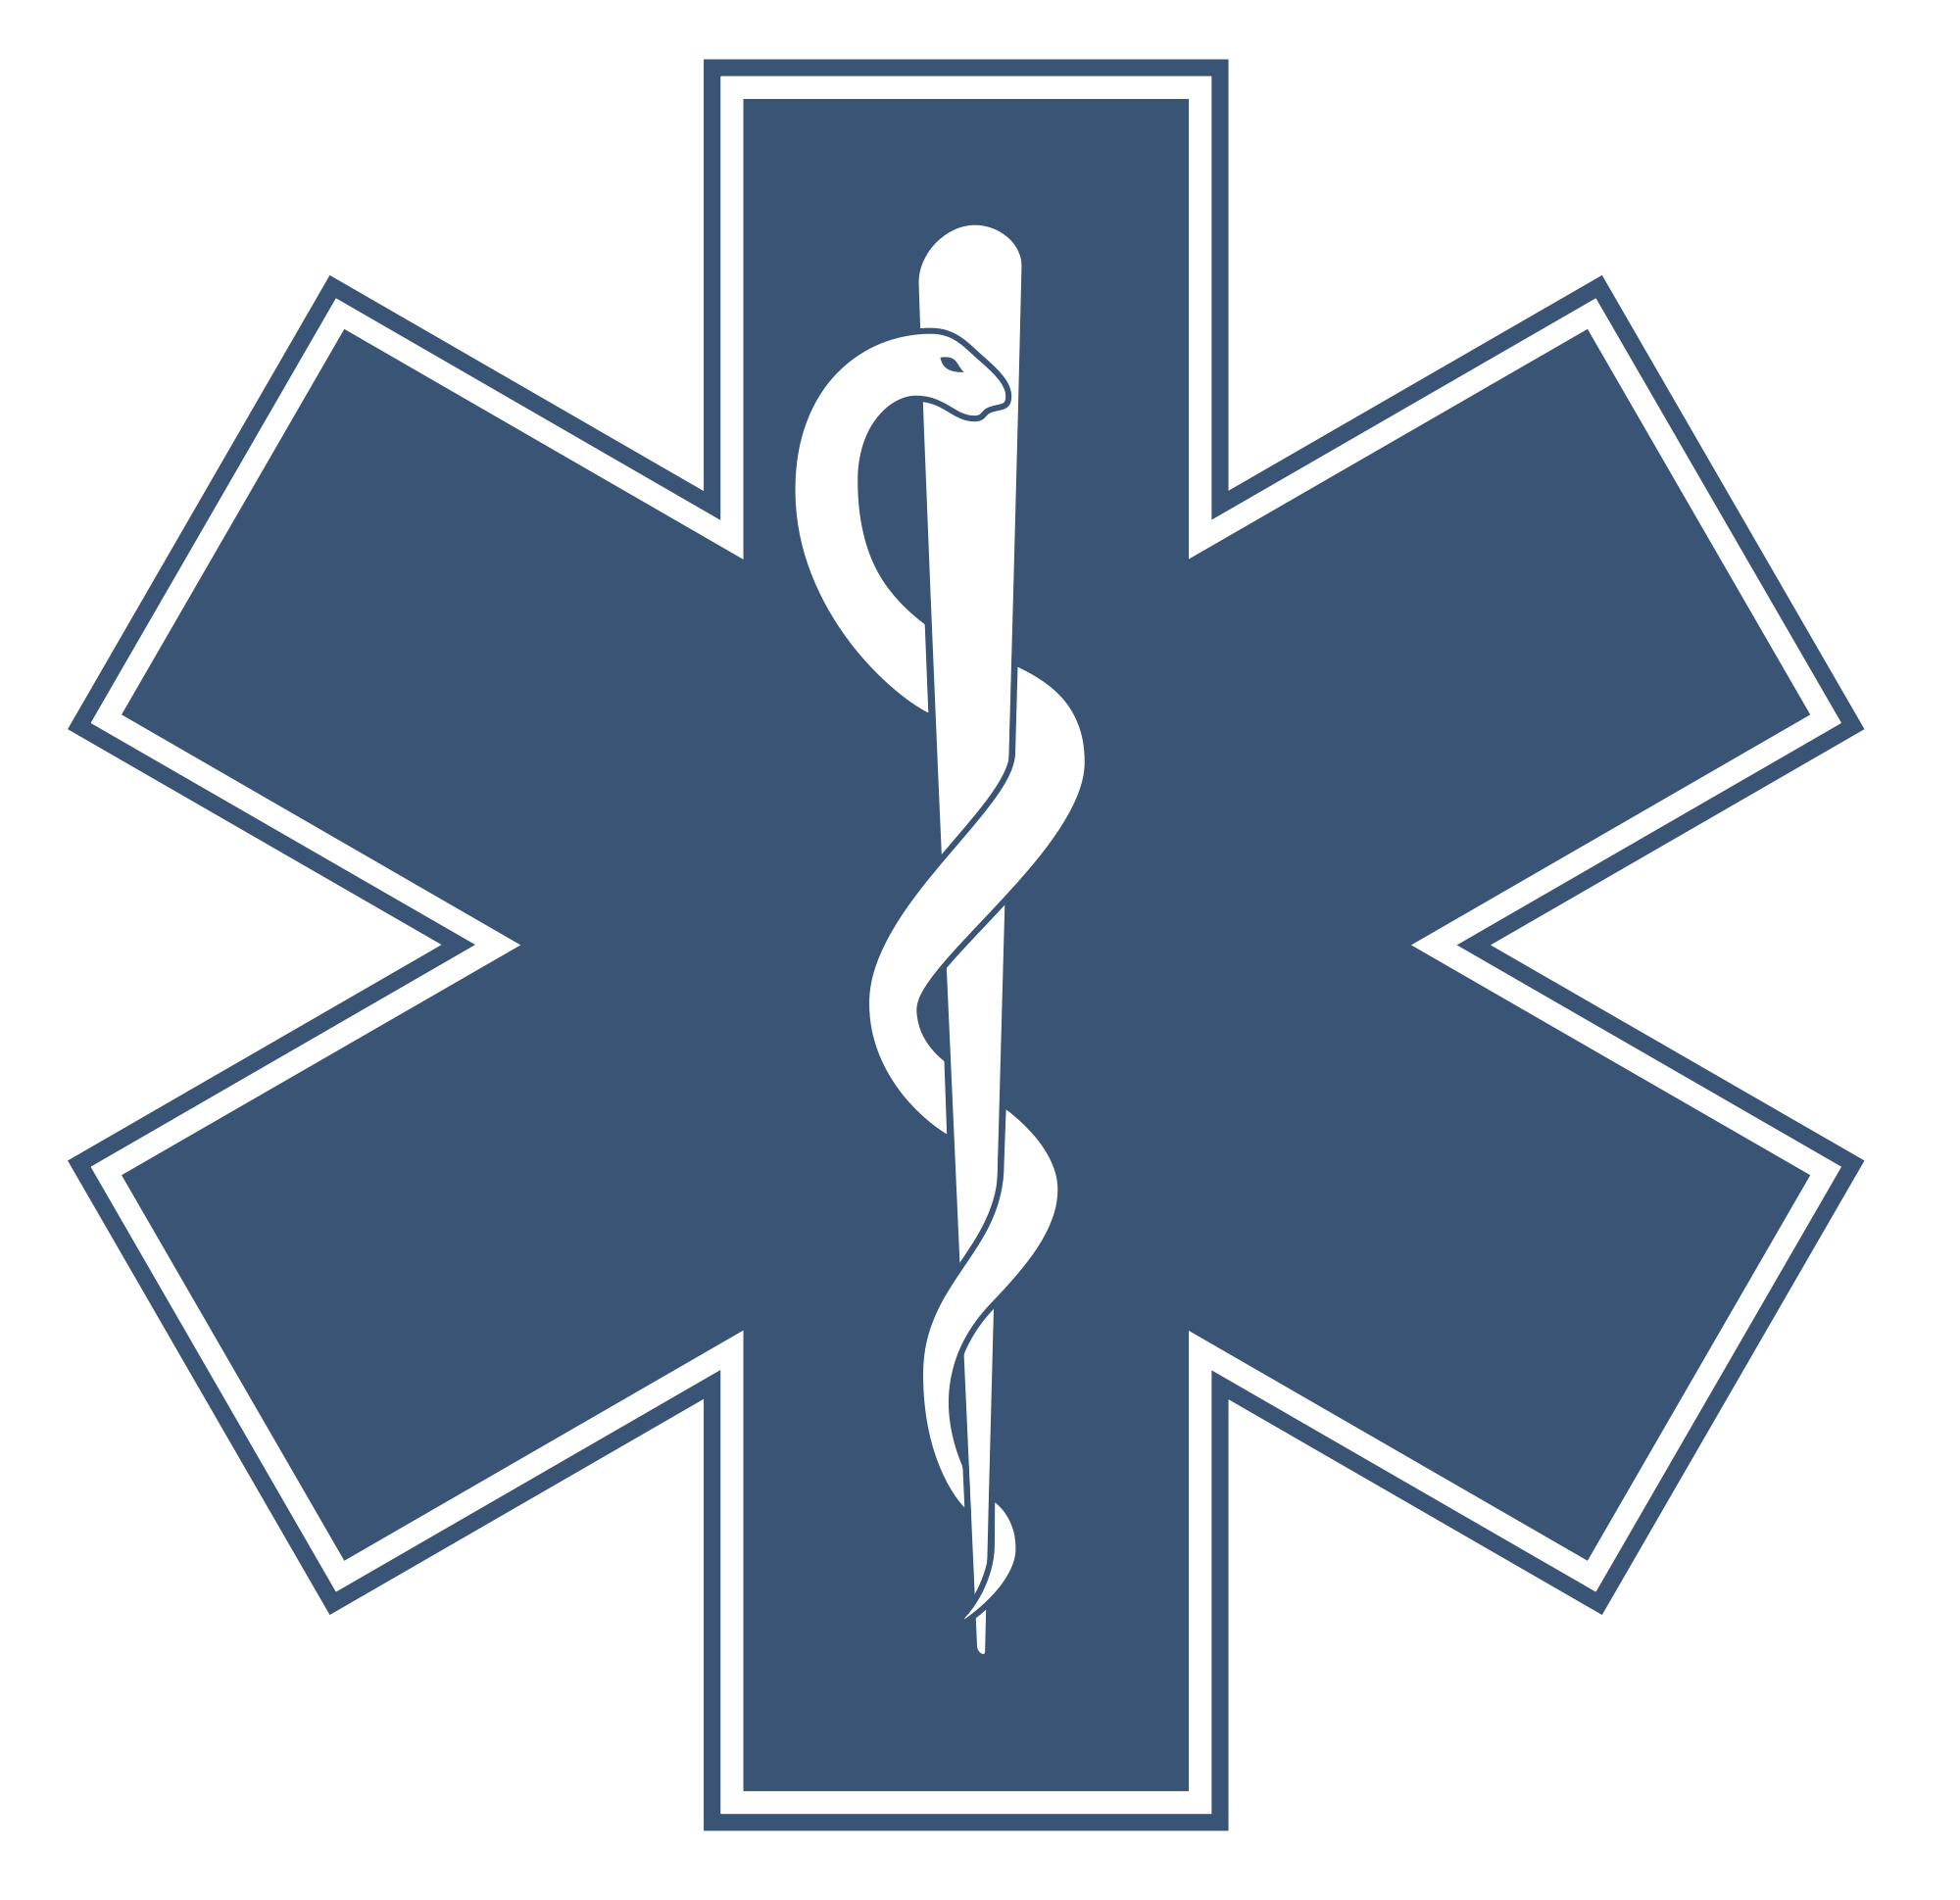 Star of Life Logo - File:Star of life.svg - Wikimedia Commons